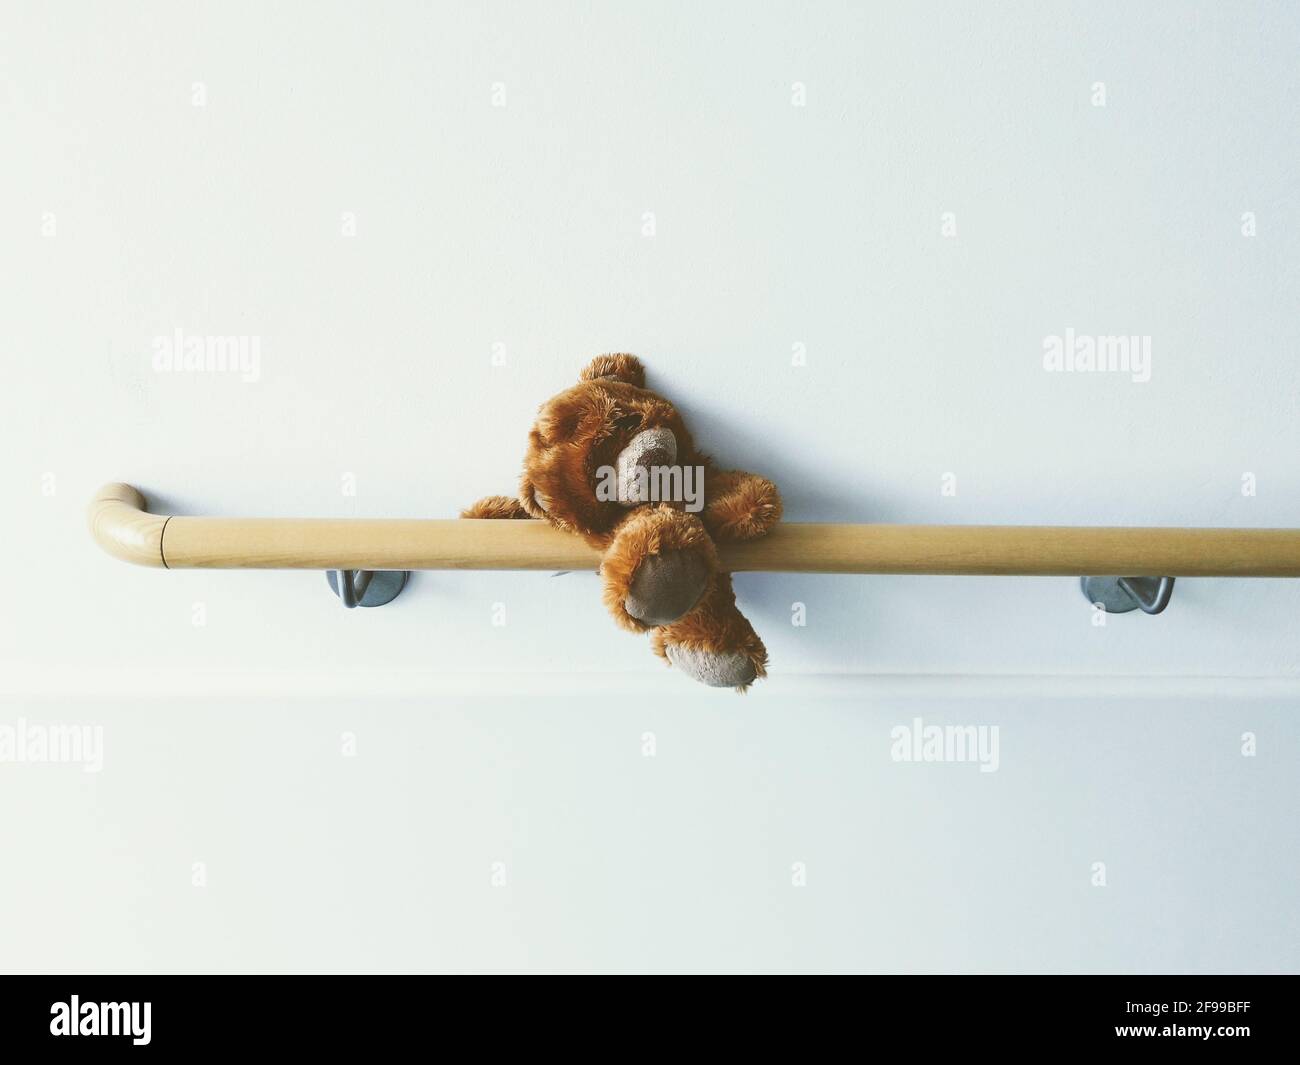 A forgotten, lone, lonely teddy bear is trapped on an armrest in the hospital. Stock Photo